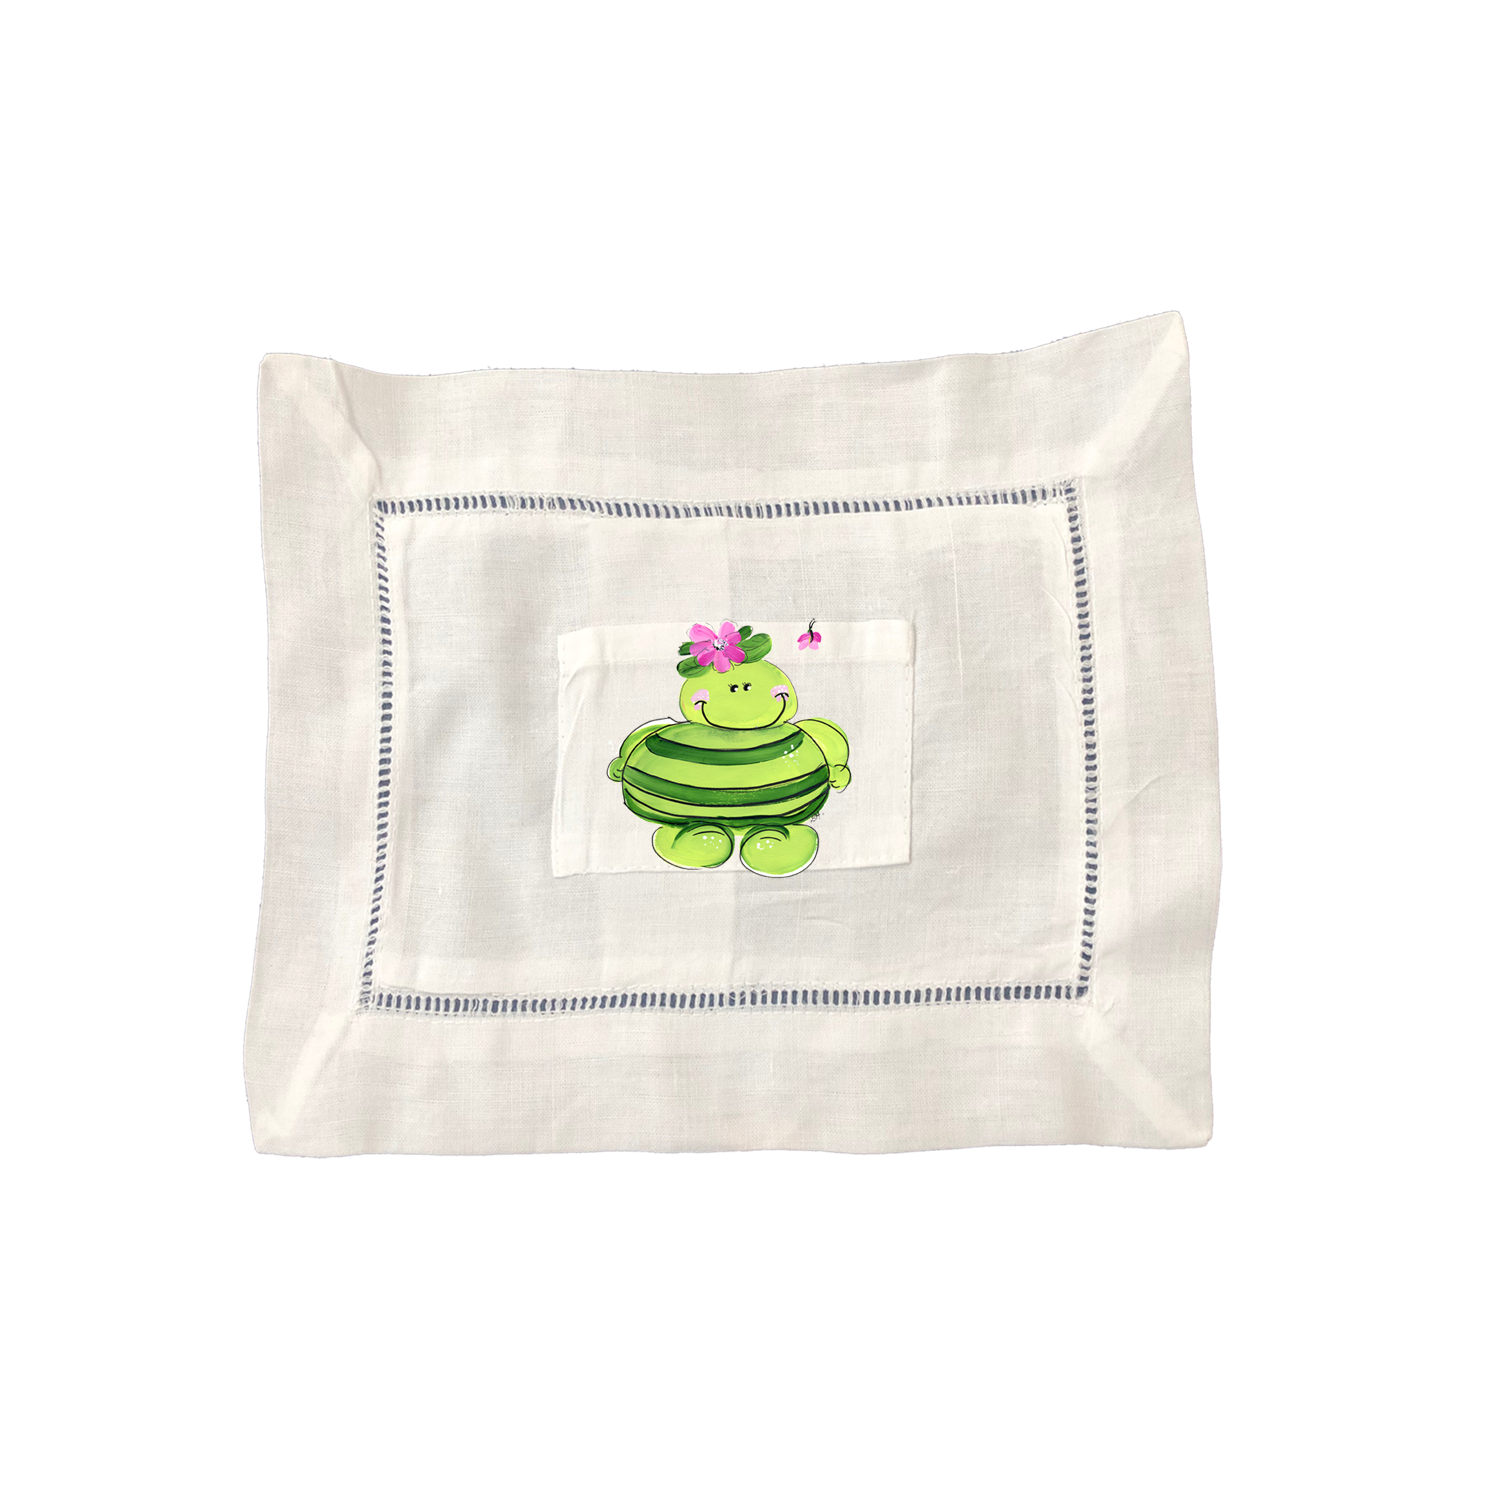 Large Tooth Fairy Pillow Trudy Turtle- TF537